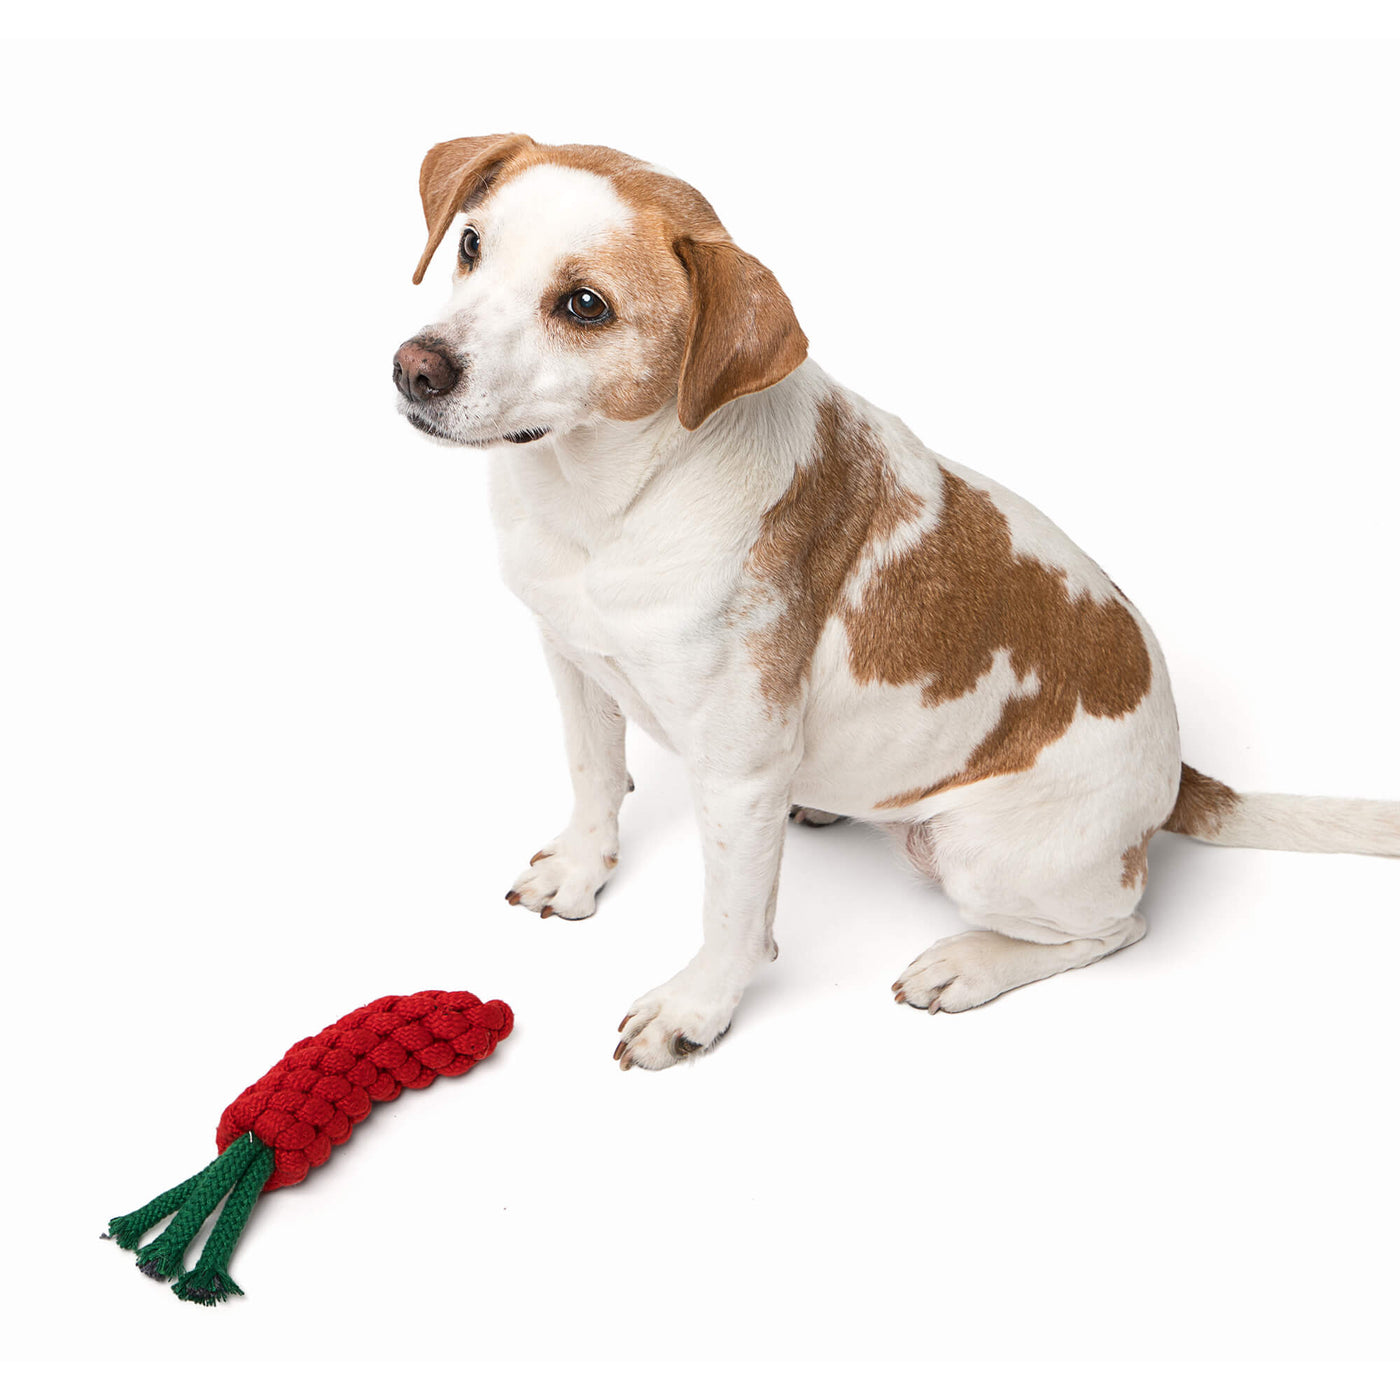 Only Natural Pet Eco-Friendly Regenerated Cotton Carrot Dog Toy